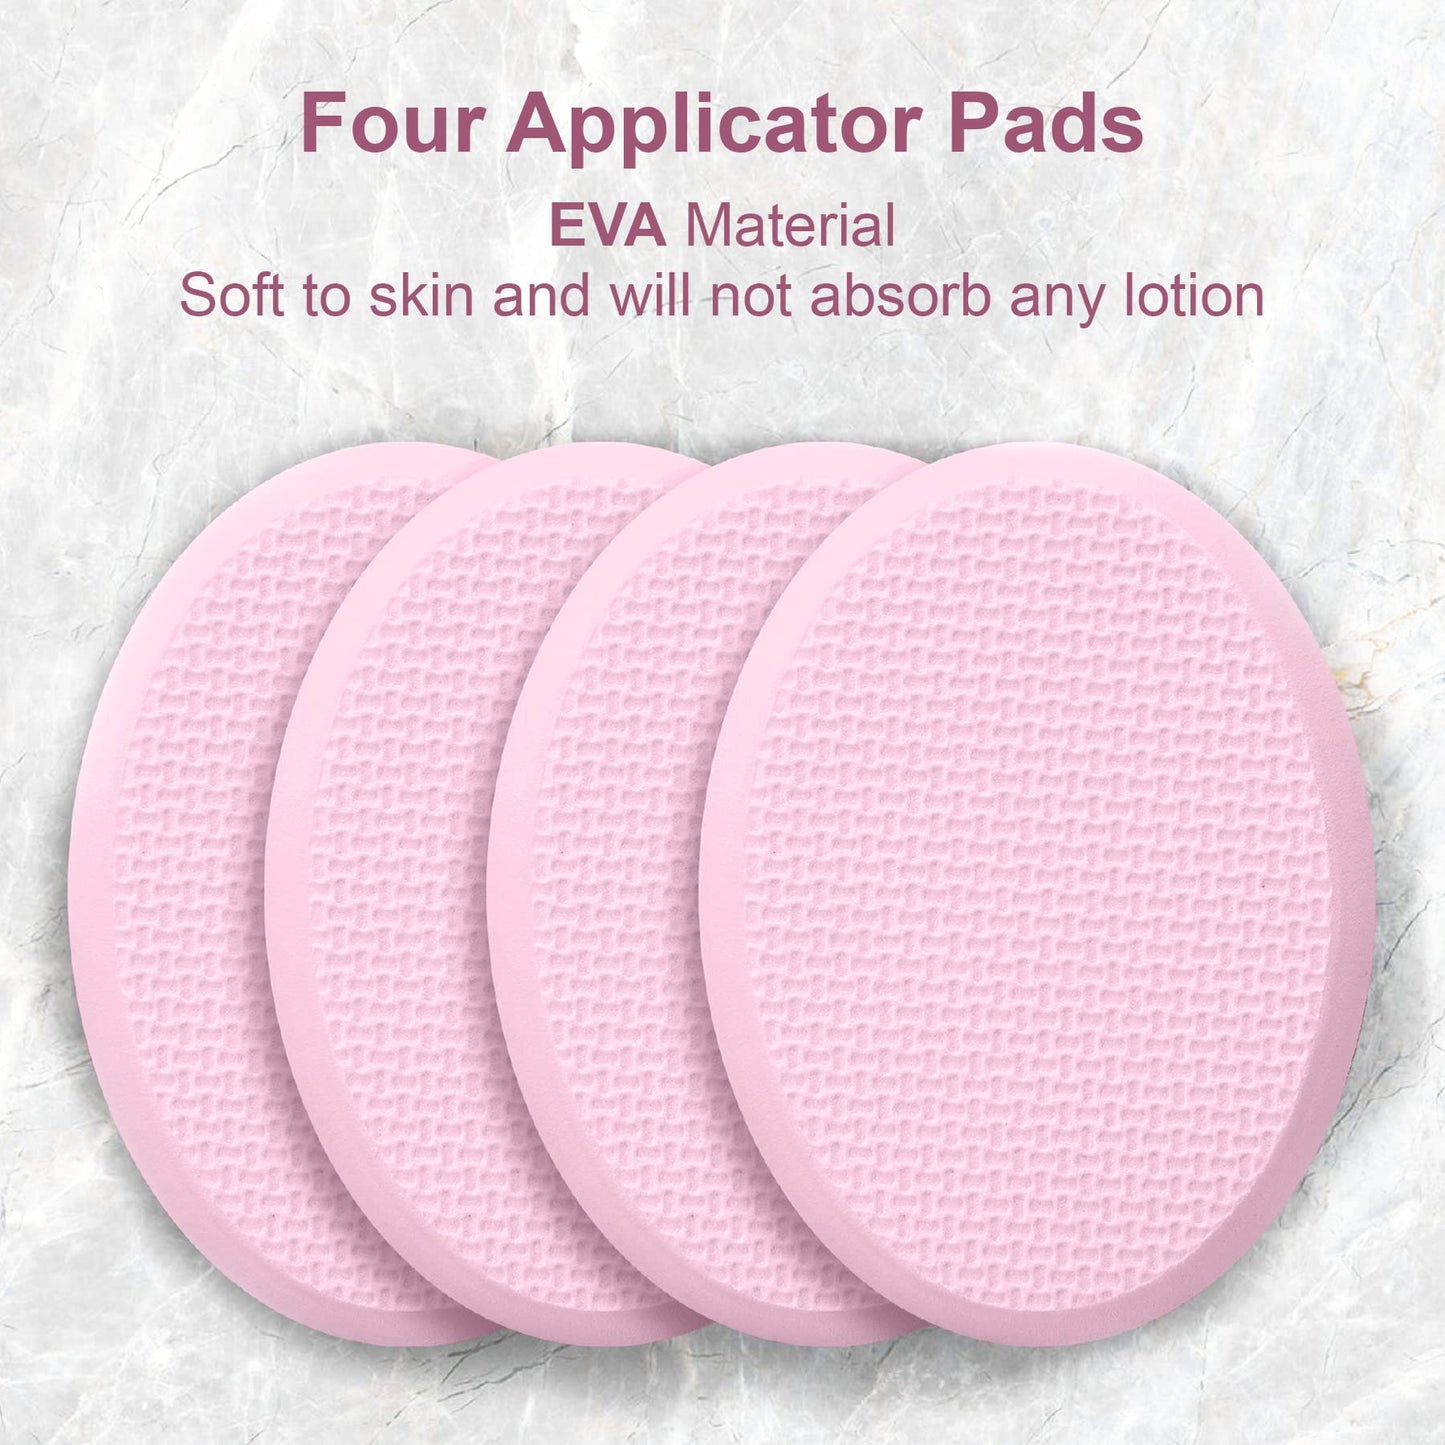 AmazerBath Lotion Applicator for Back, Feet, 4 Replaceable Pads with 1 Long Handled, Back Lotion Applicator for Elderly, Women, Apply Cream Medicine Skin Cream Moisturizer Sunscreen Tanner, Pink